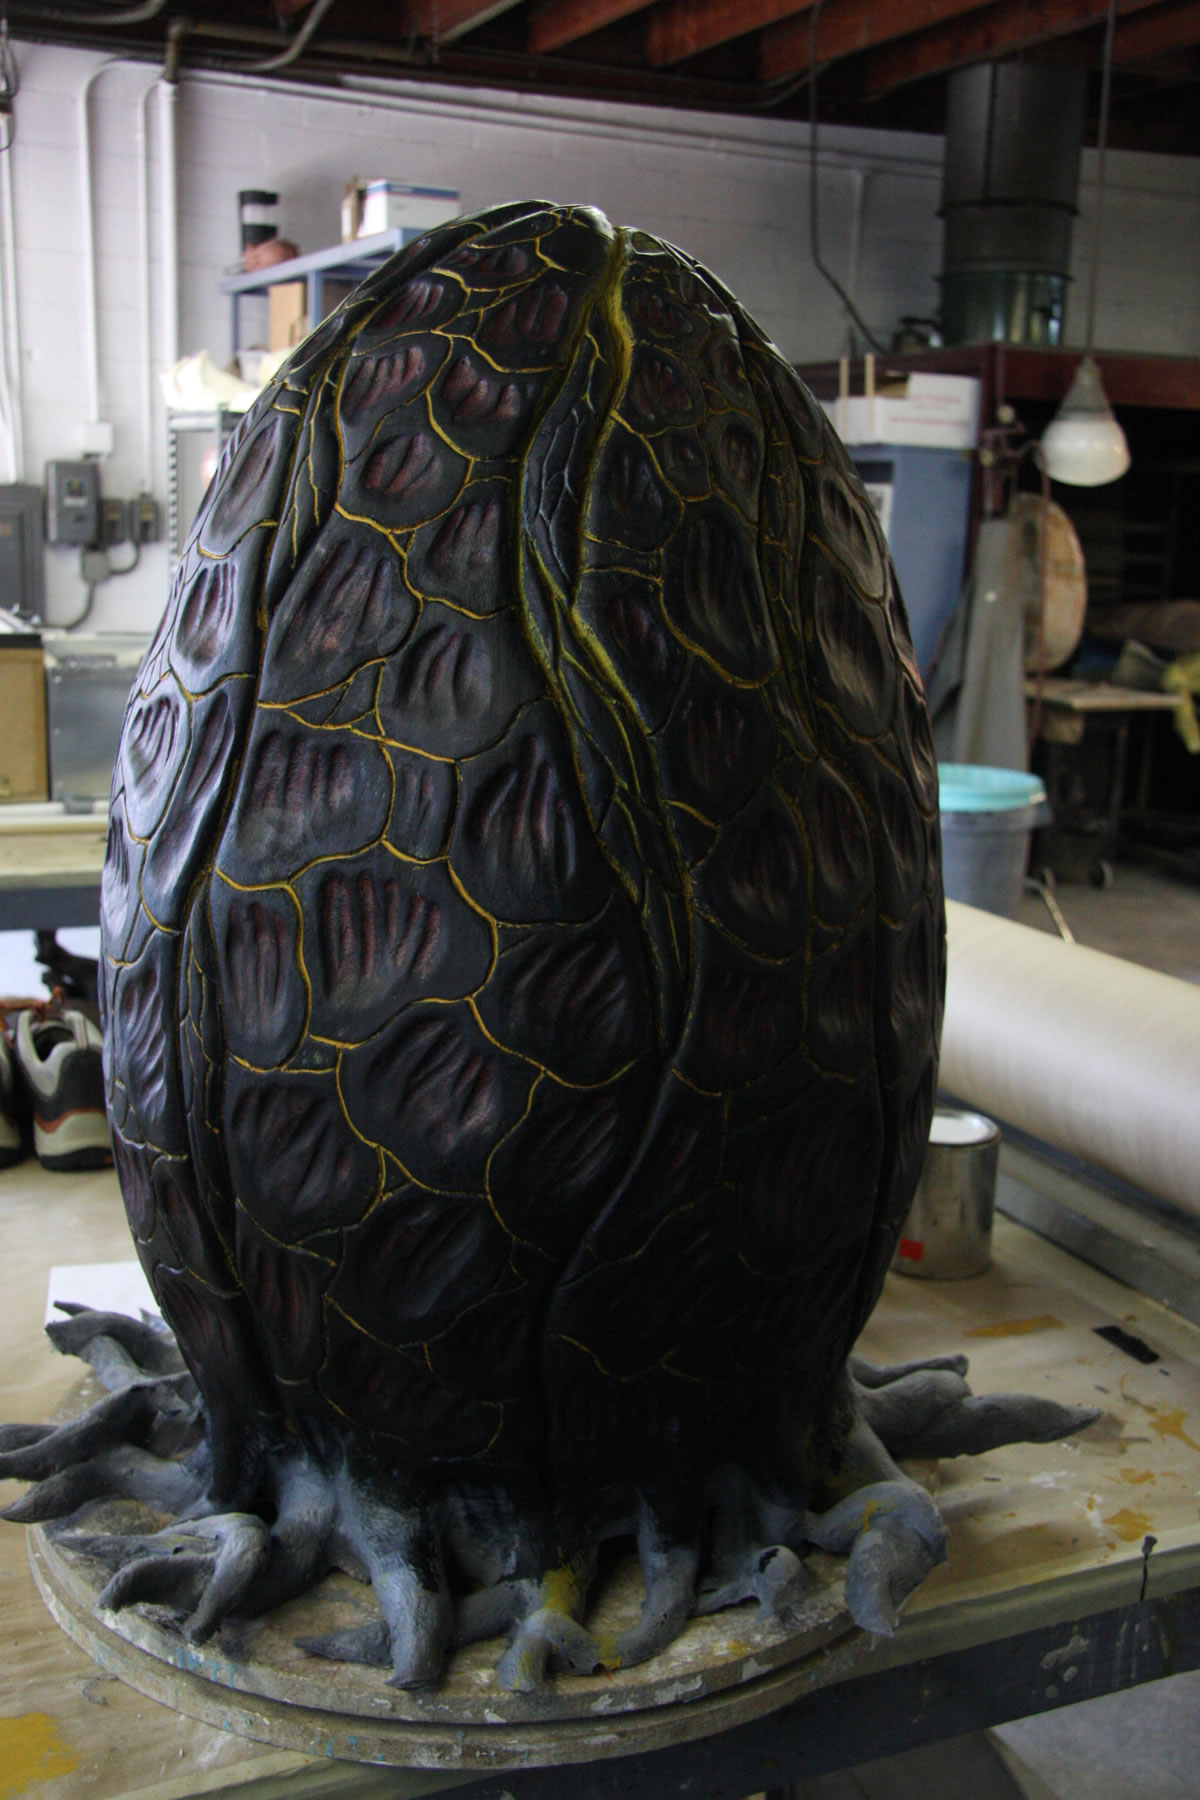 Alien Egg for the series 'Scare Tactics'